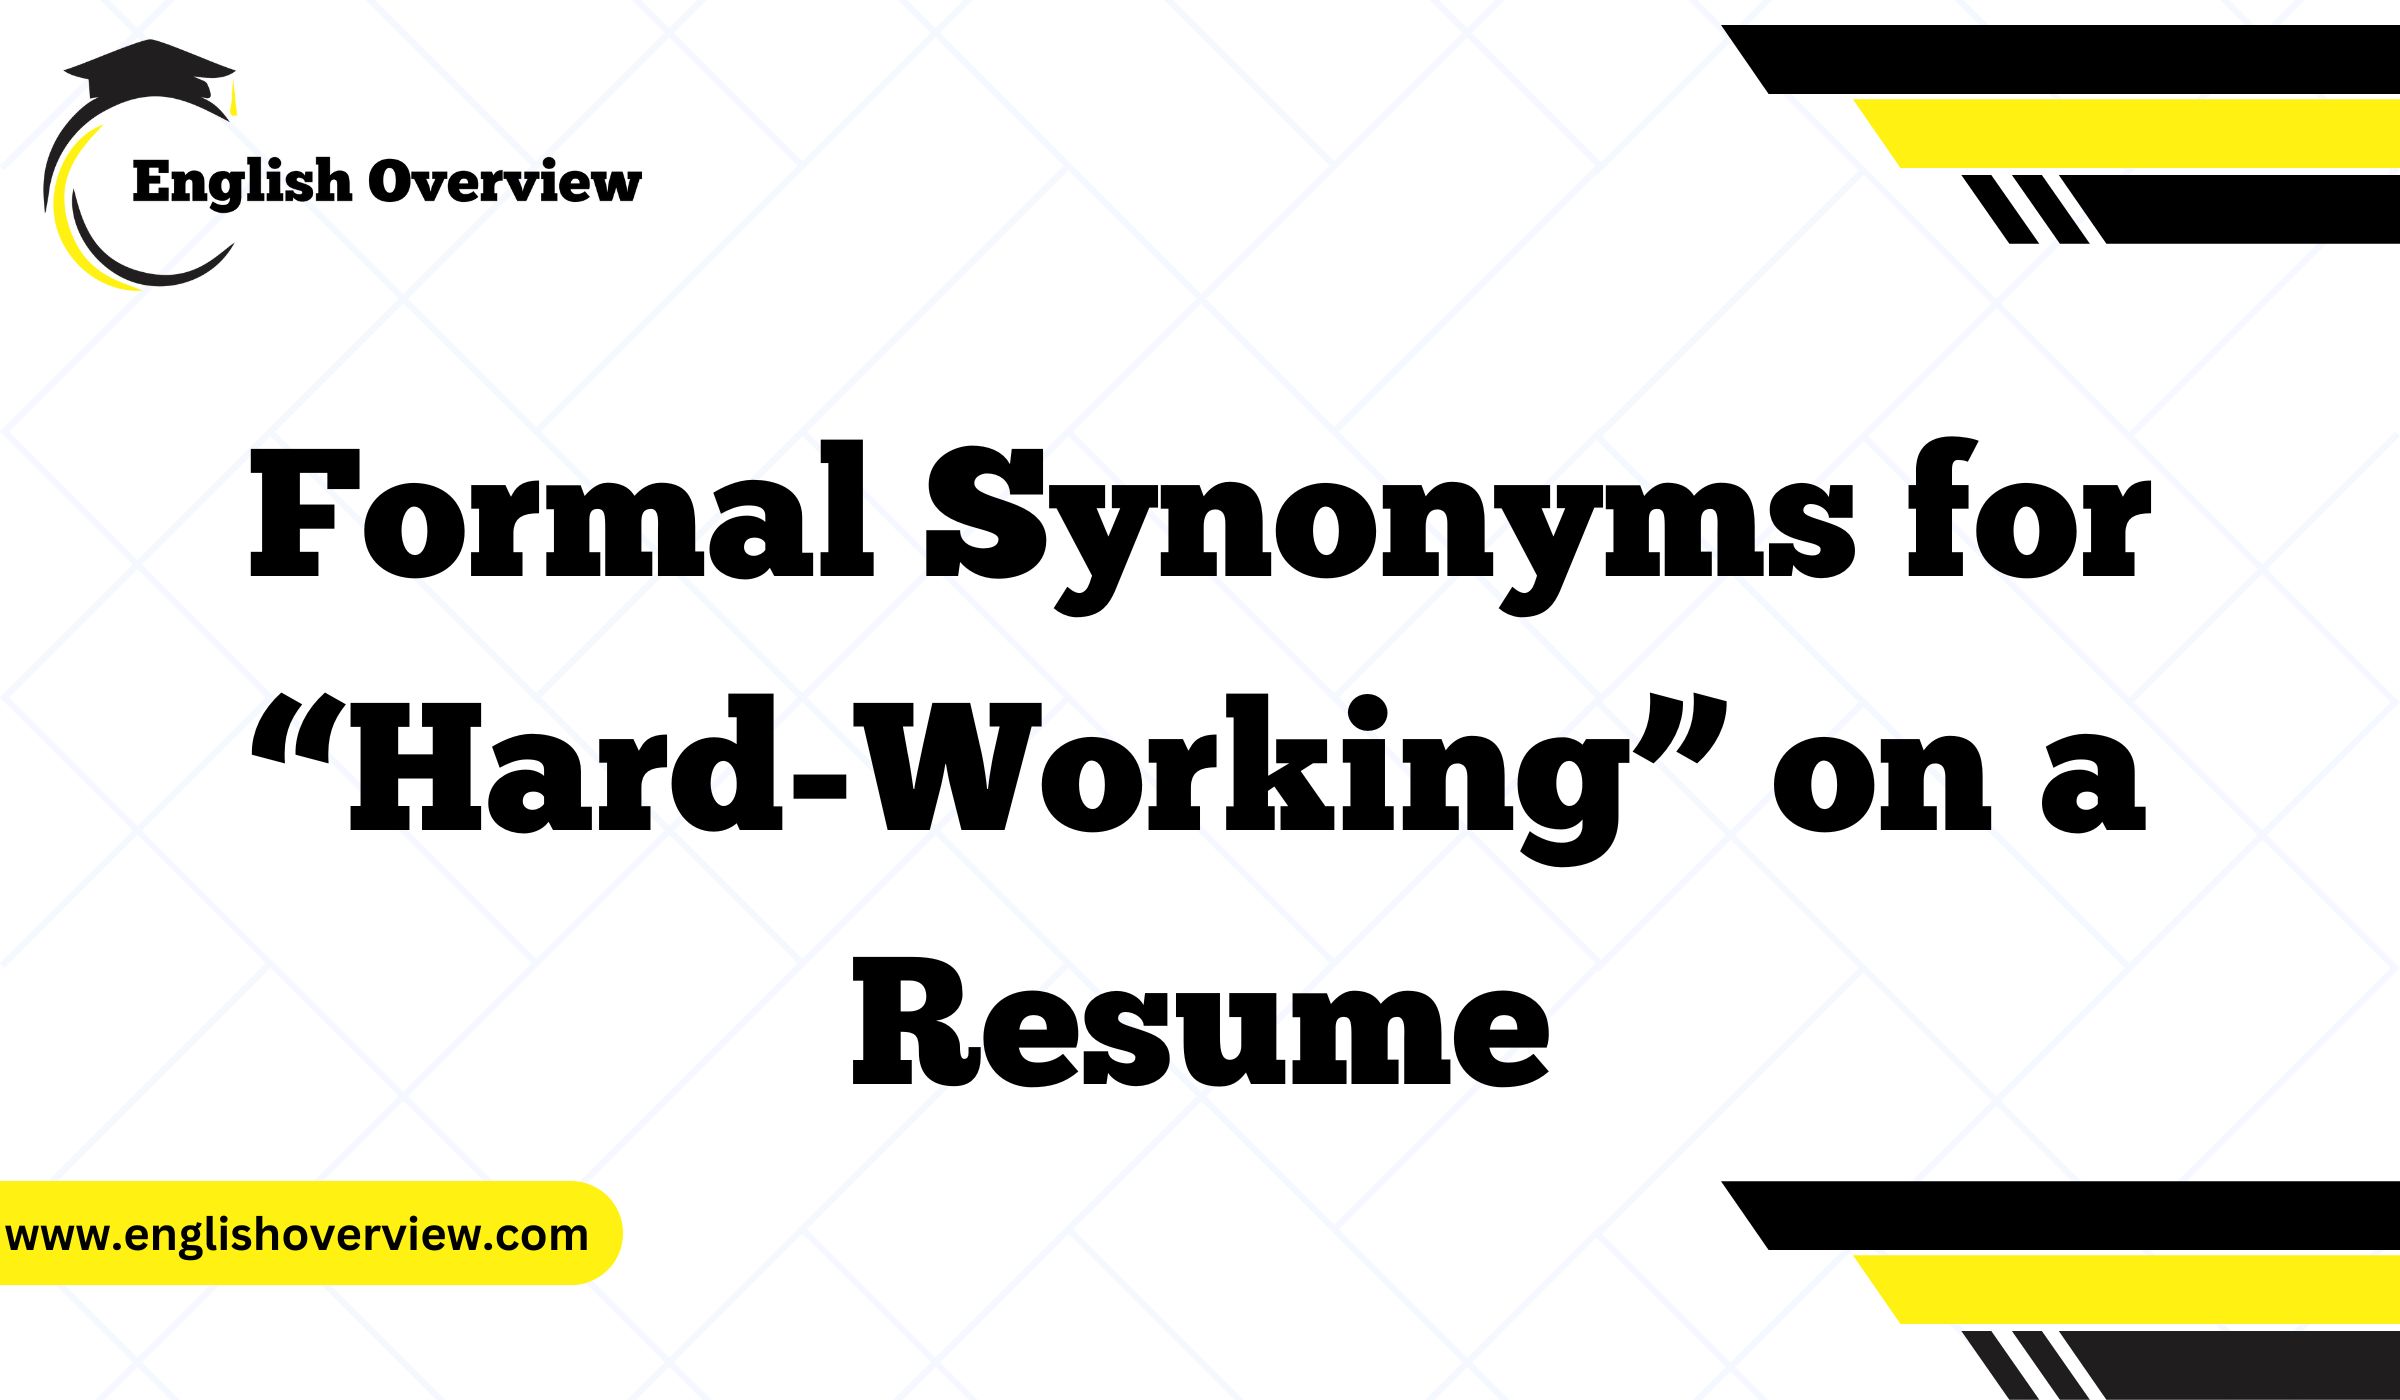 Formal Synonyms for “Hard-Working” on a Resume